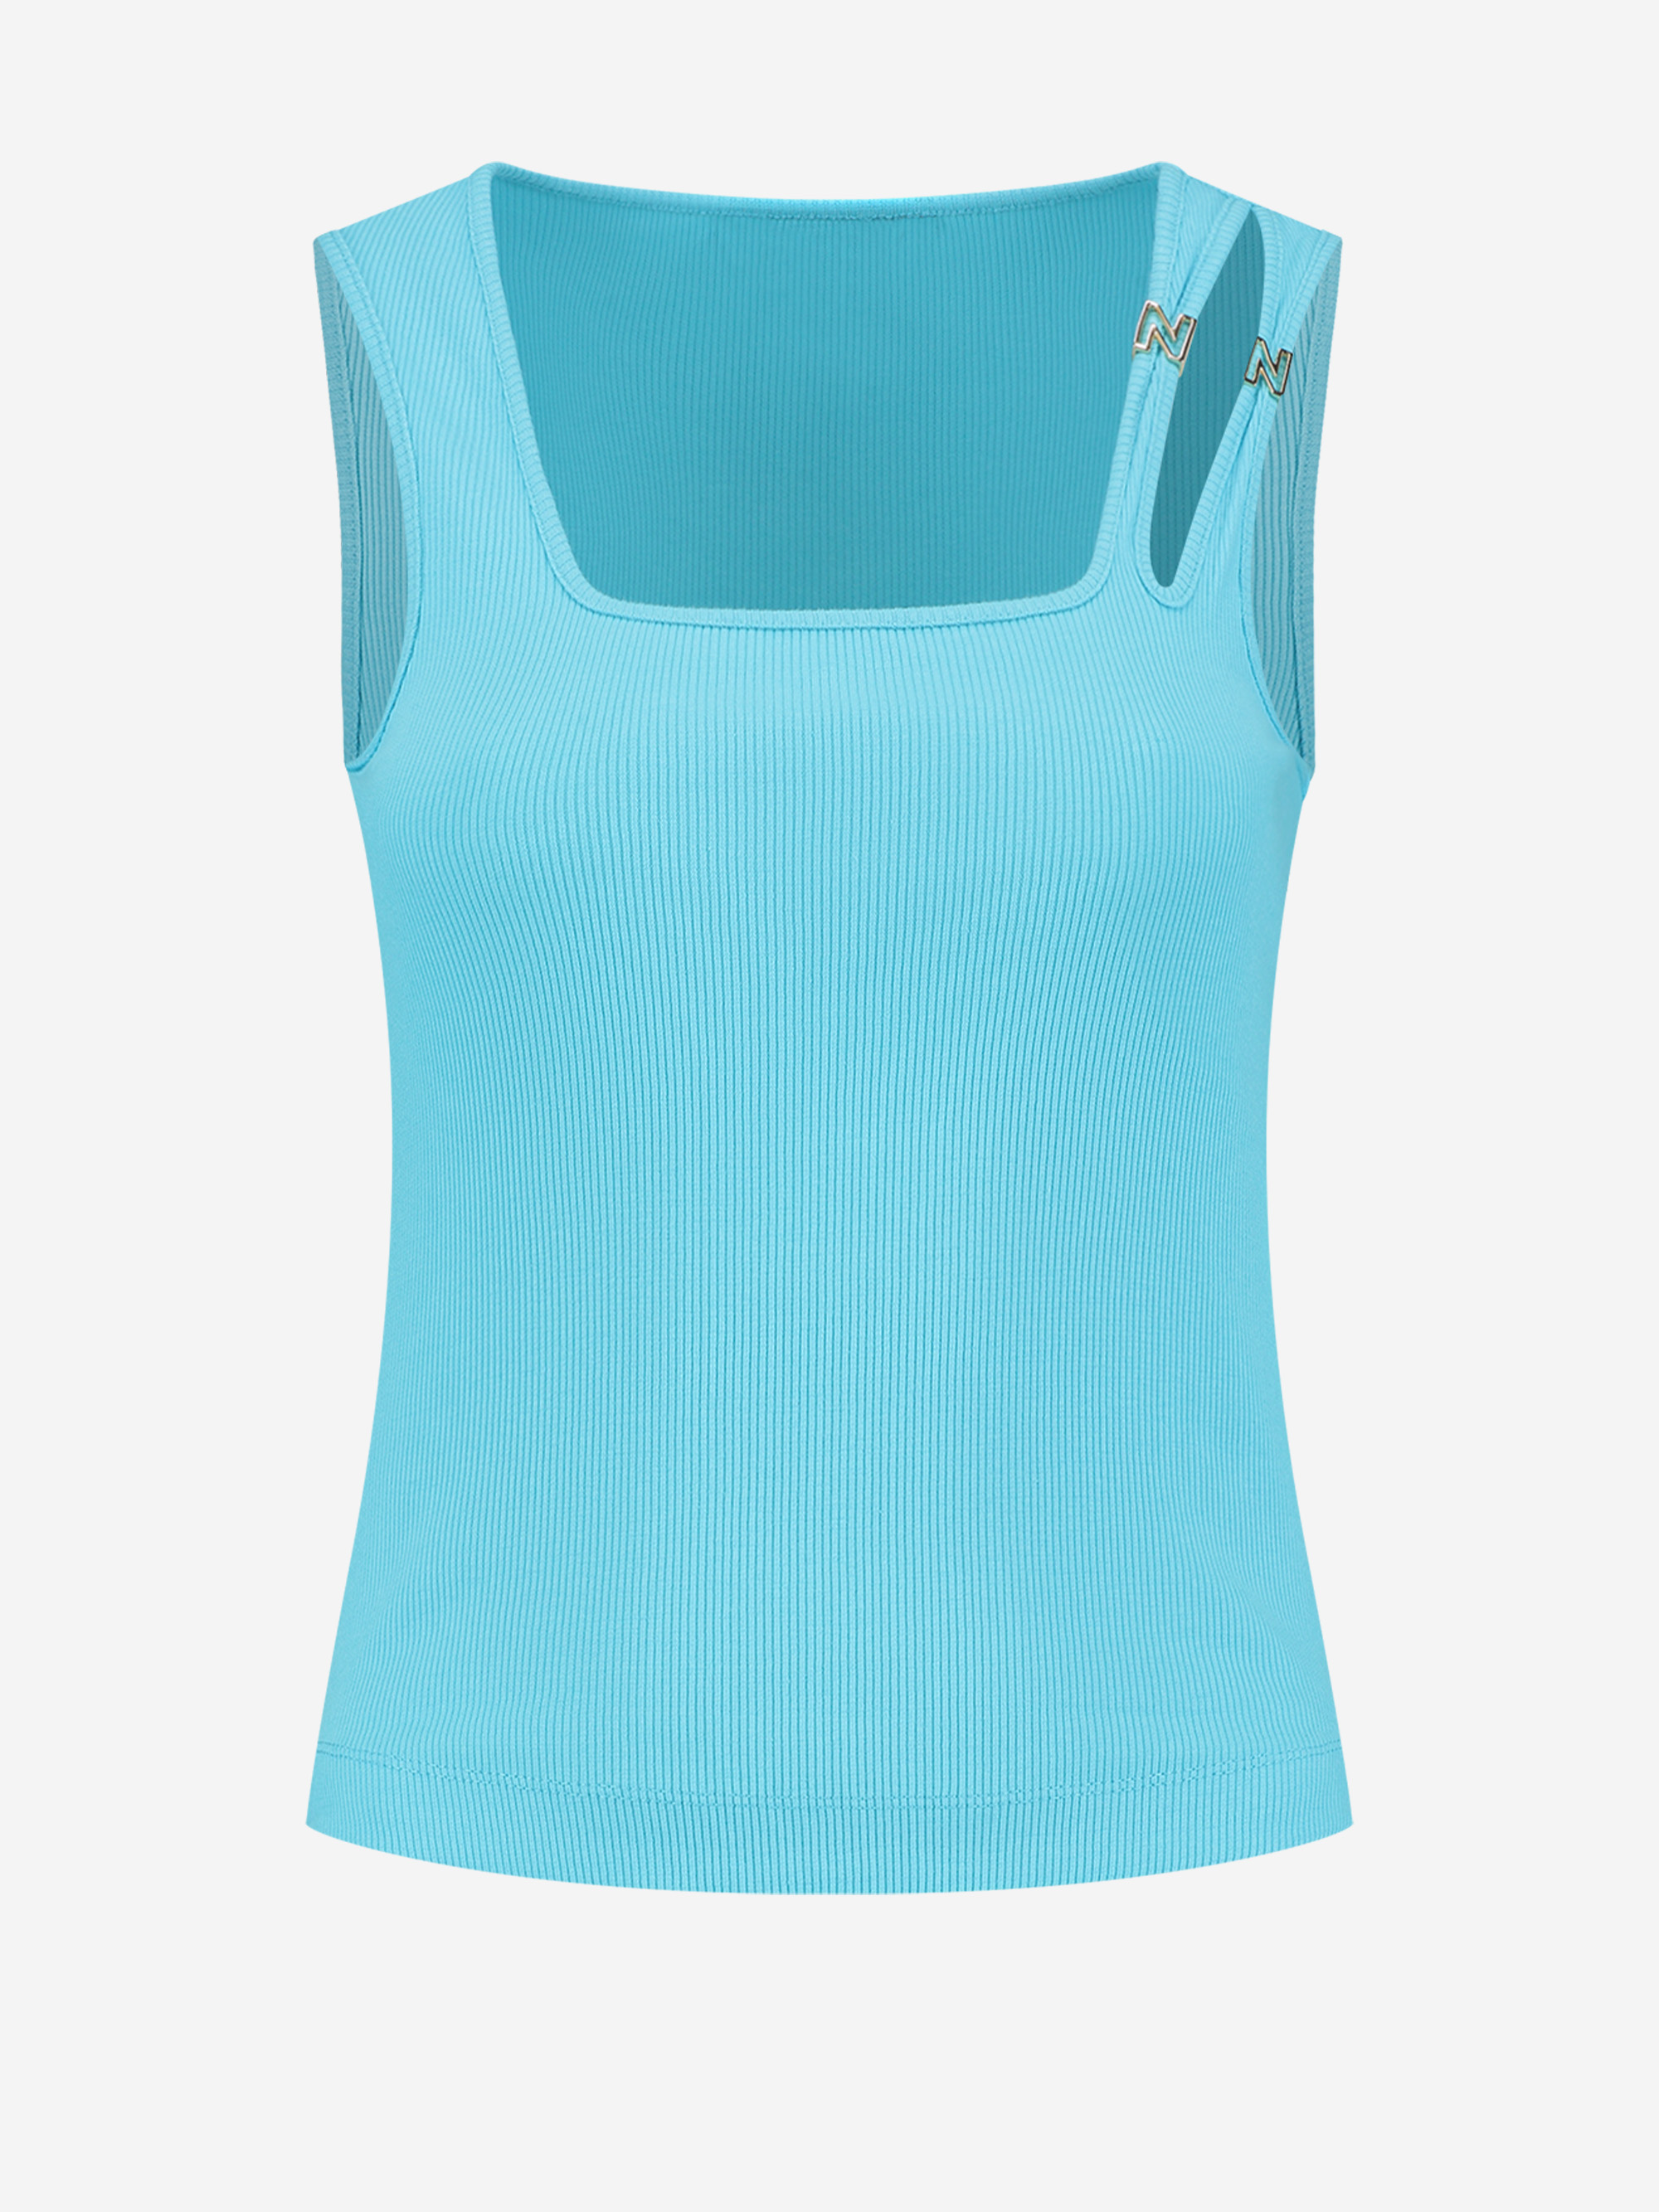 Tanktop with strap detail